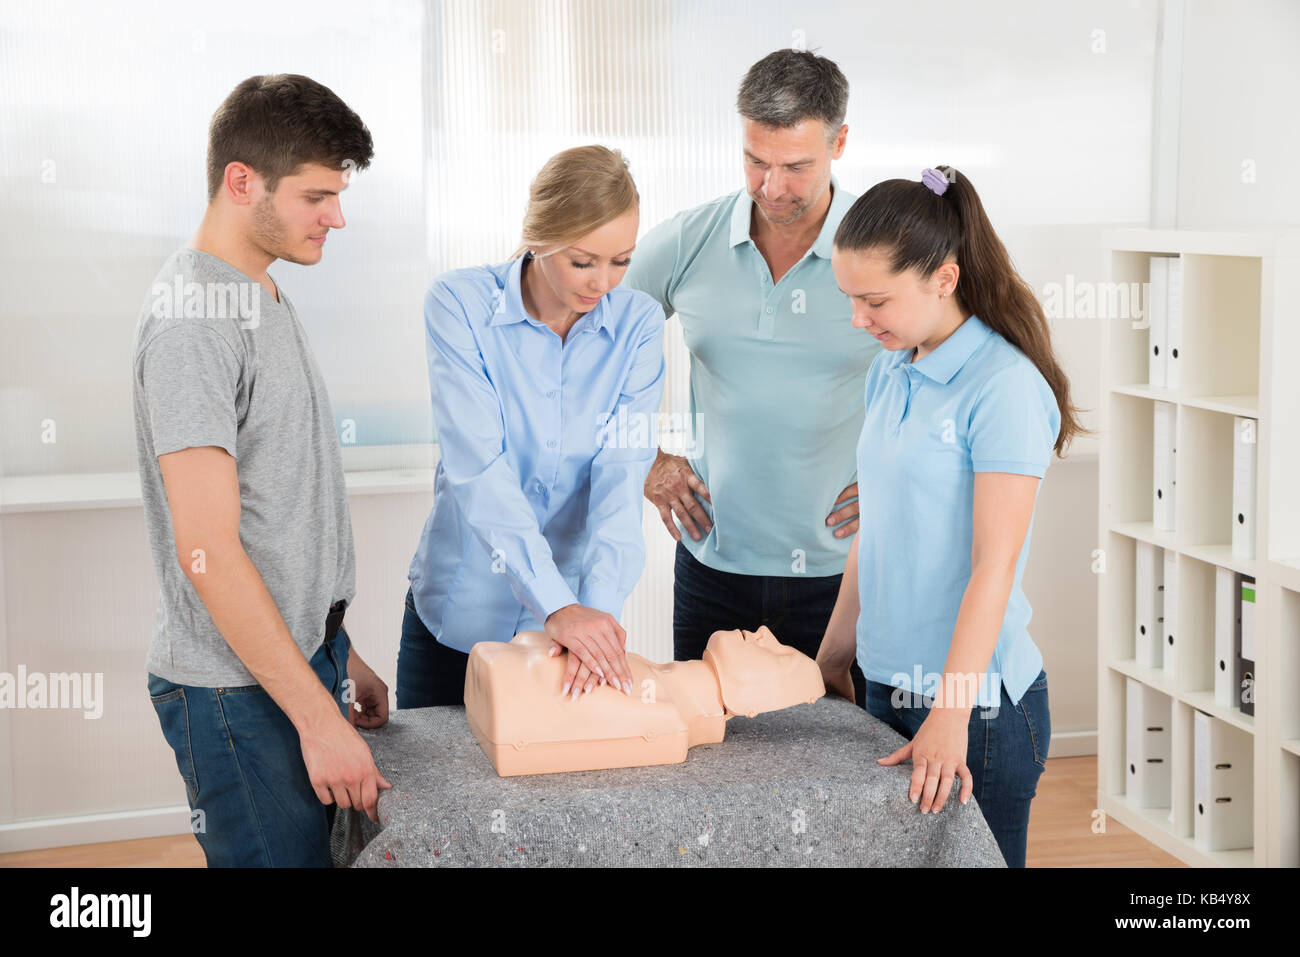 Group Of Students Learning Cardiopulmonary Resuscitation In Class Stock Photo